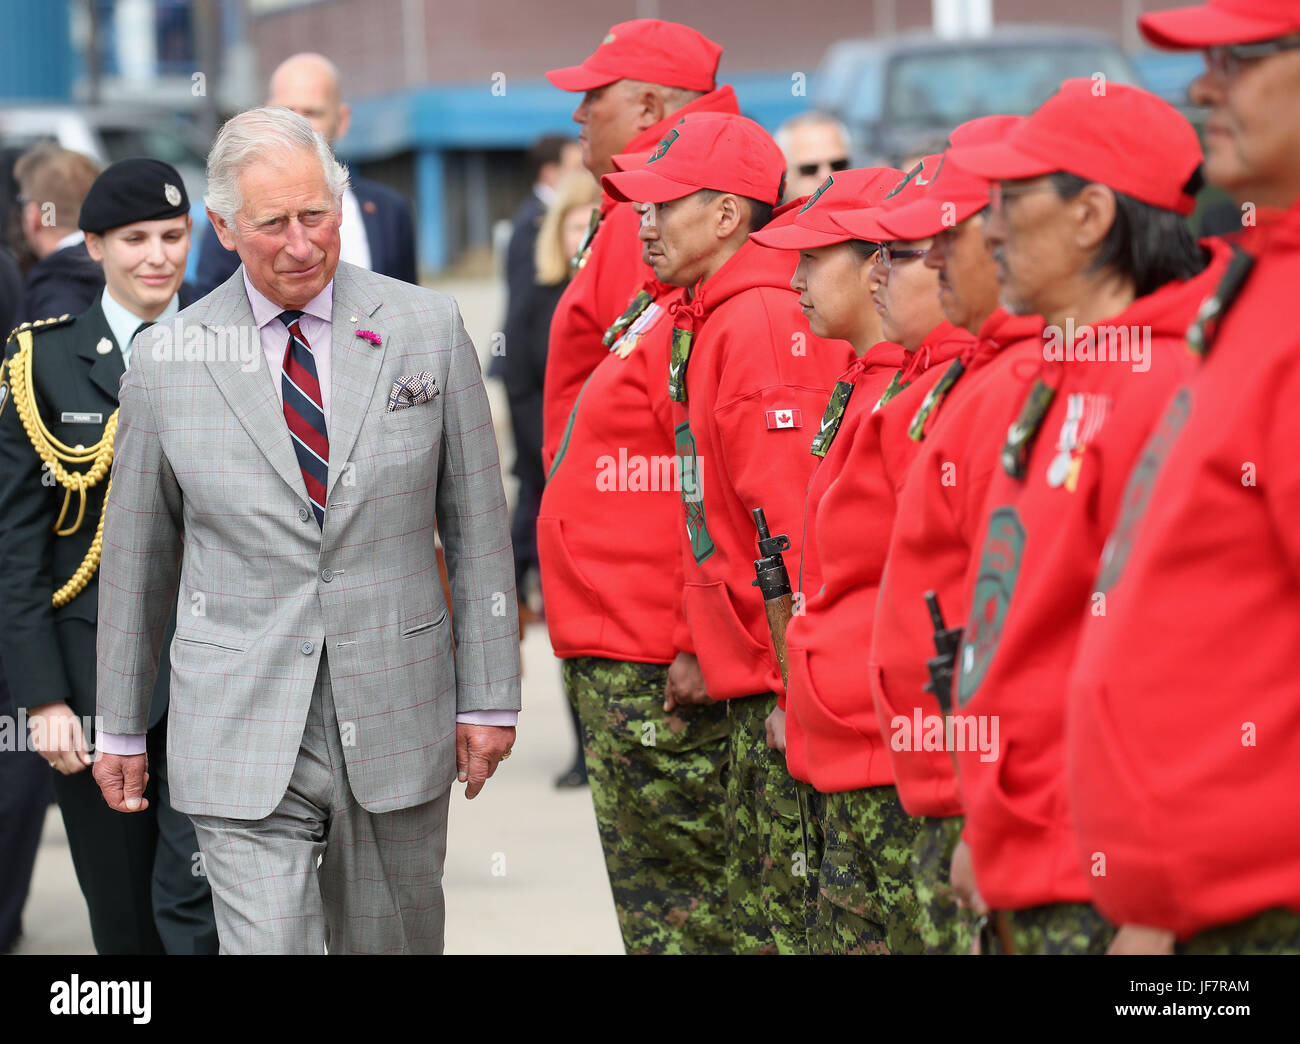 The Prince of Wales reviews Canadian Rangers during an official welcome  ceremony at Nunavut Legislative Assembly in Iqaluit, the capital city of  the Canadian territory of Nunavut, at the start of their